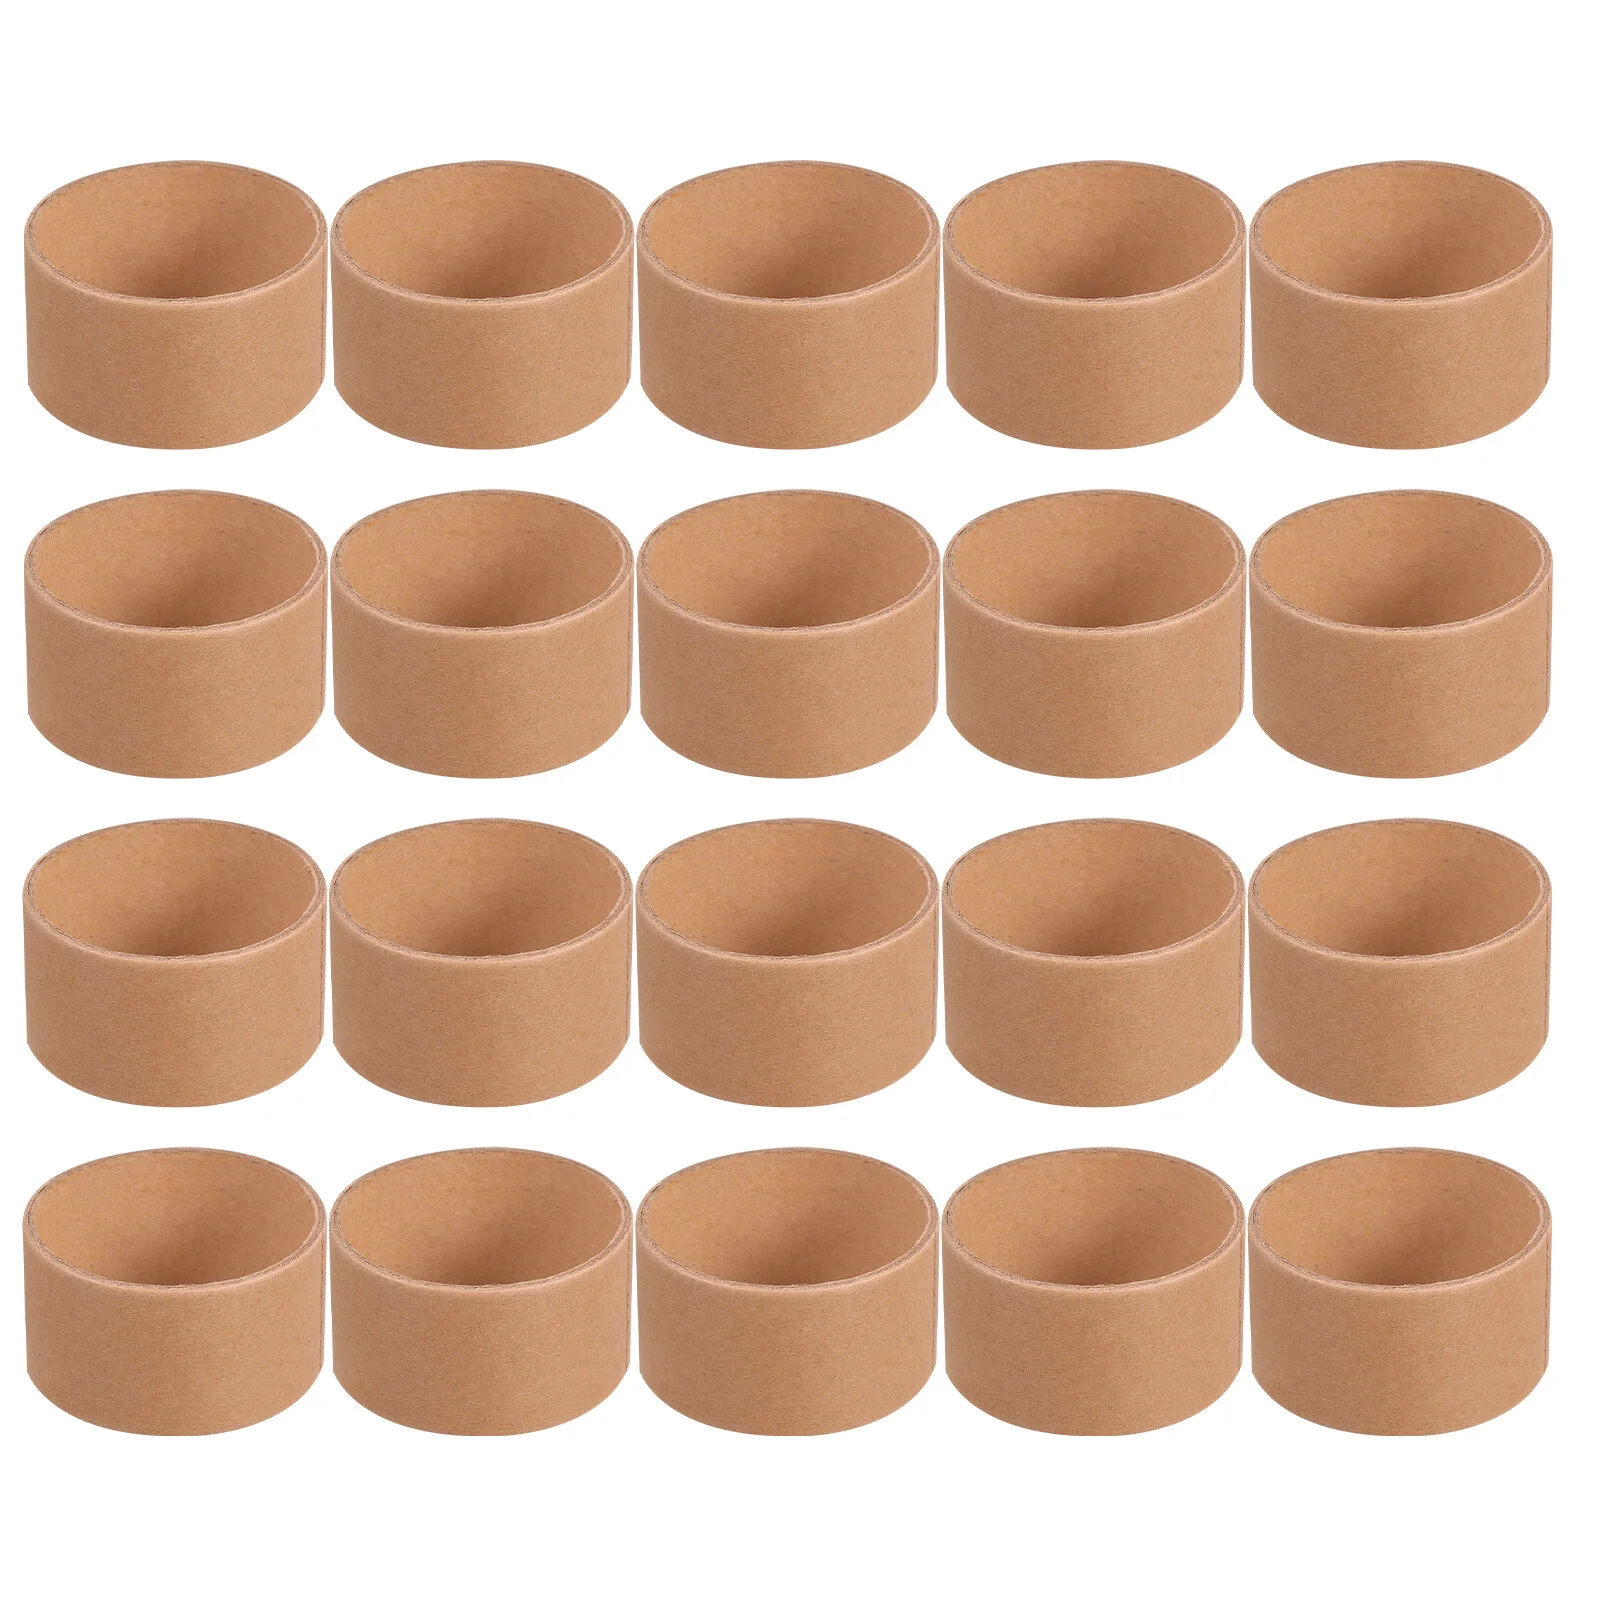 

20pcs Kraft Paper Craft Tube Open- Ended DIY Round Paperboard Tubes Cardboard Rolls Painting for Crafts Project Accessories (